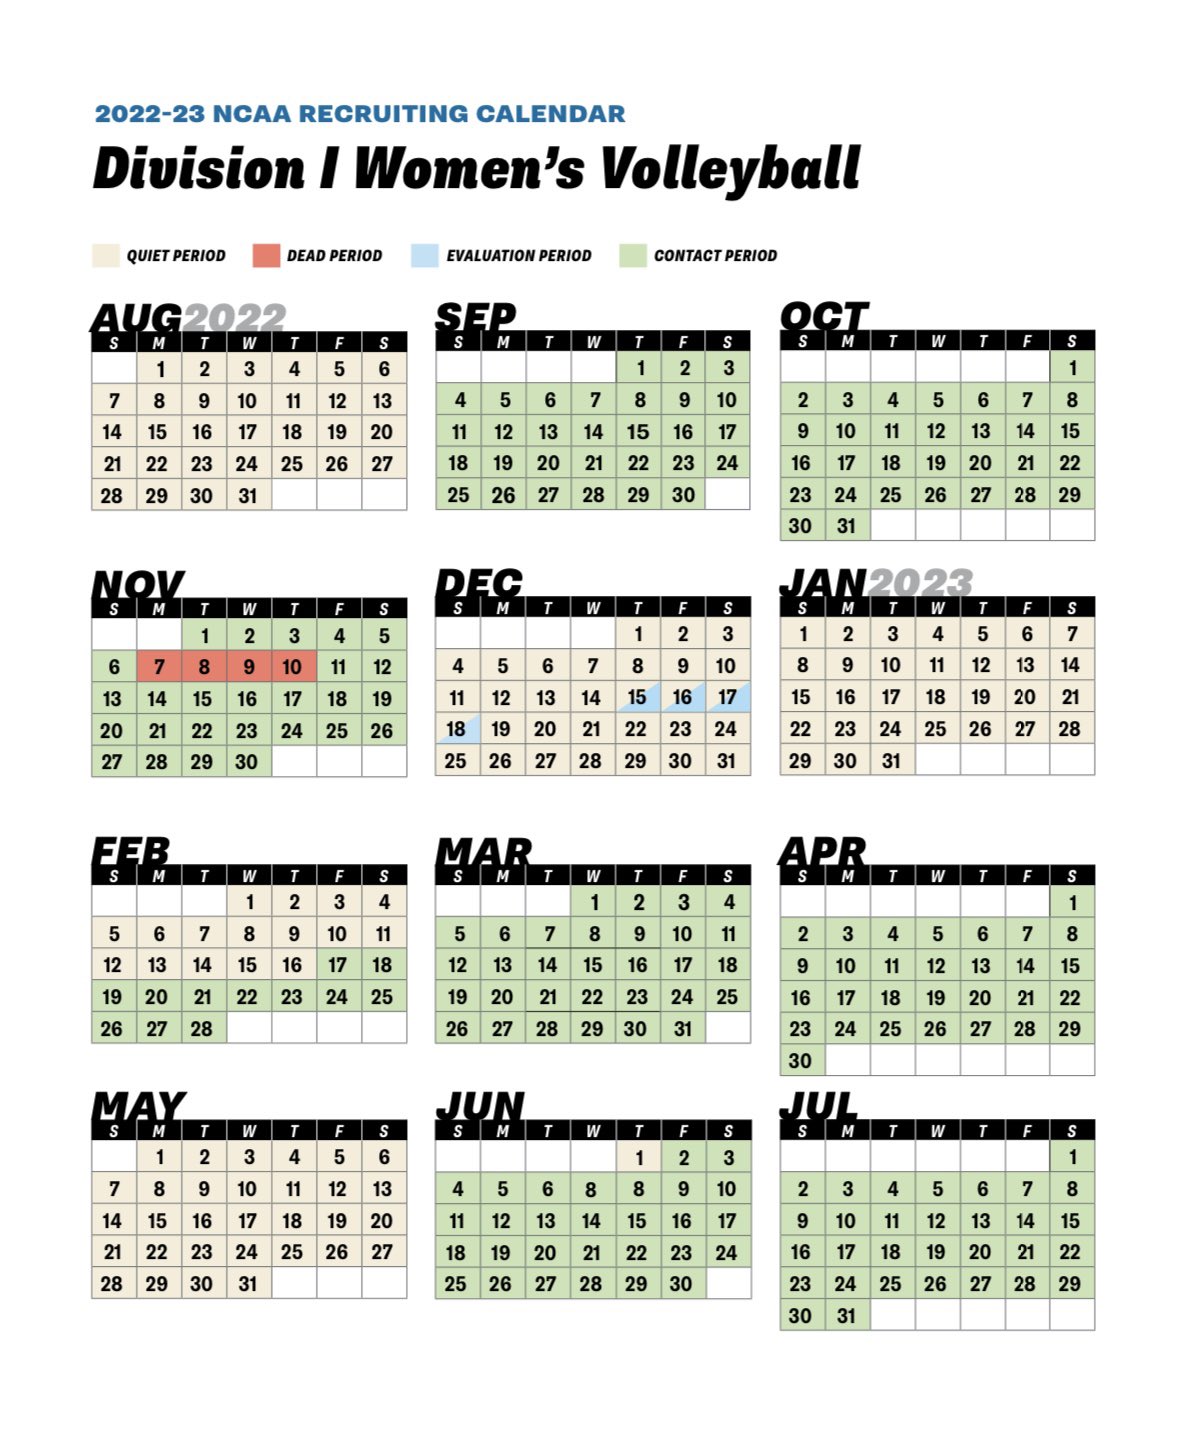 trent-tcheng-on-twitter-girls-volleyball-d1-recruiting-calendar-is-officially-out-for-2022